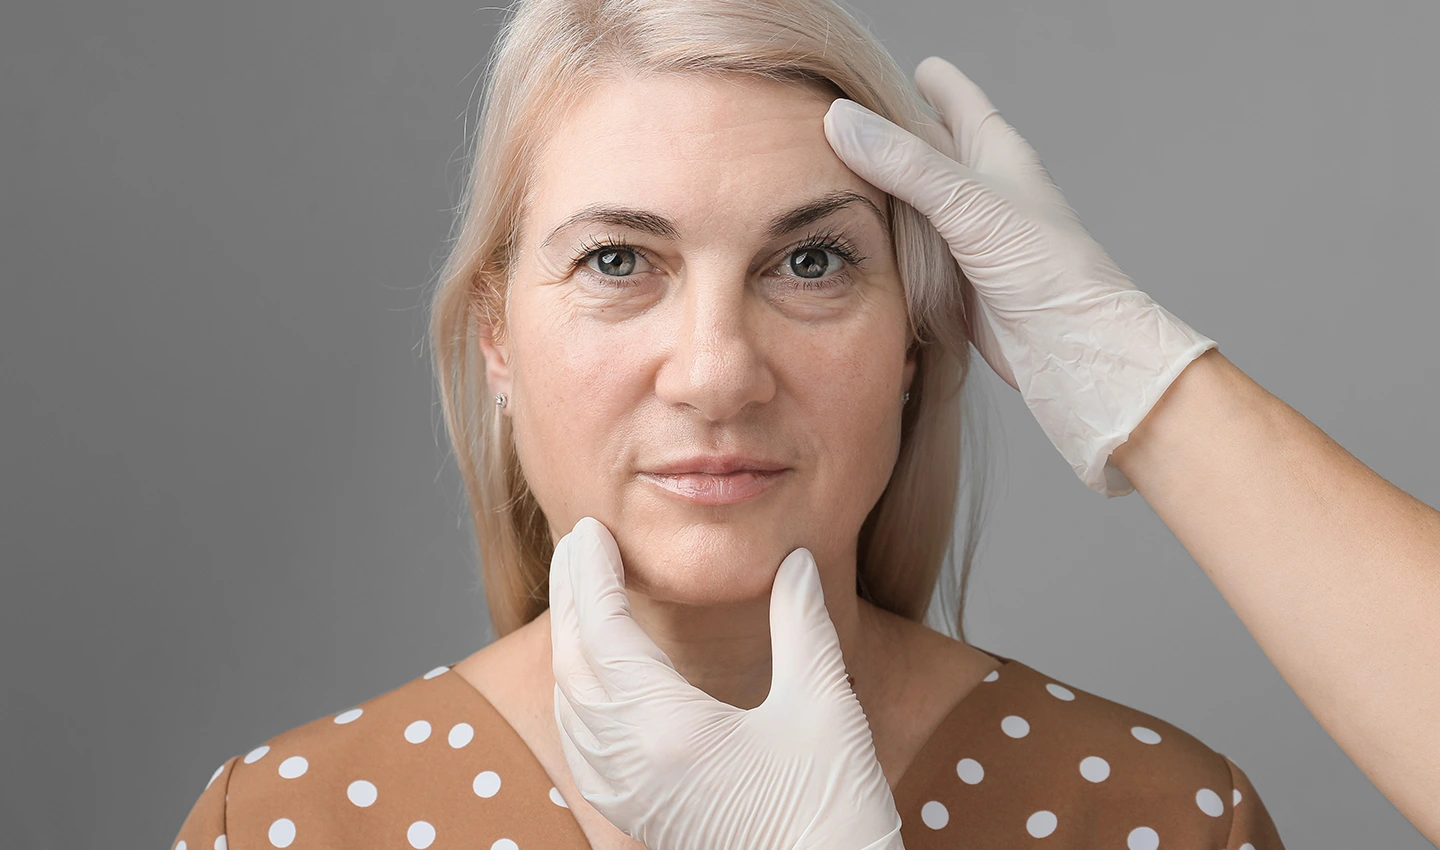 Facelift Surgery Benefits: Image of a mature woman being examined by a plastic surgeon for facelift surgery.